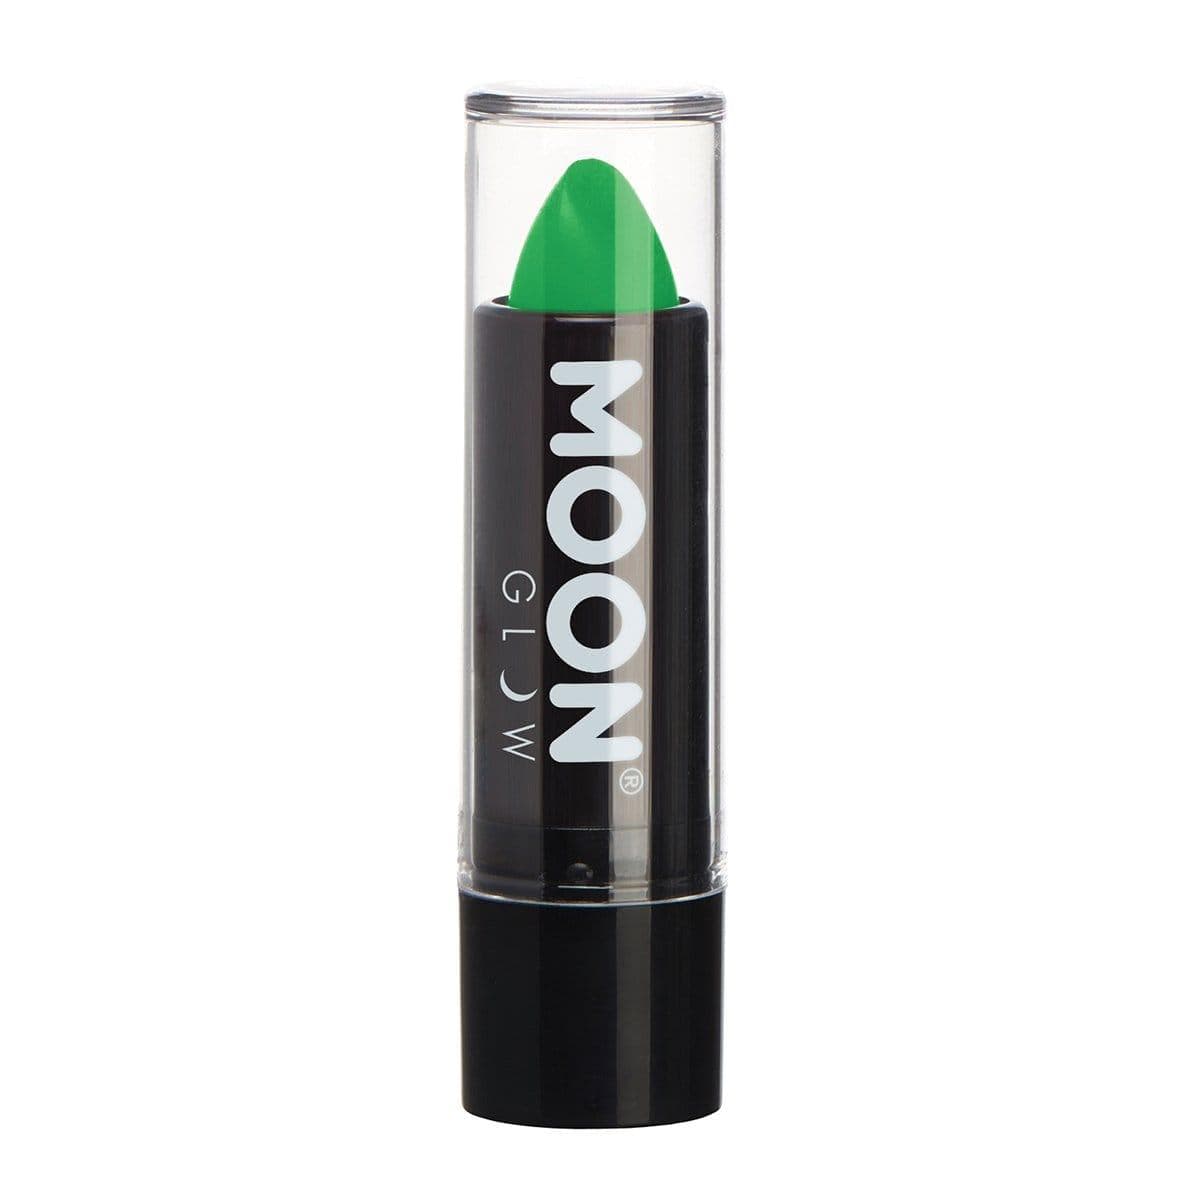 Buy Costume Accessories Moon green neon UV lipstick sold at Party Expert